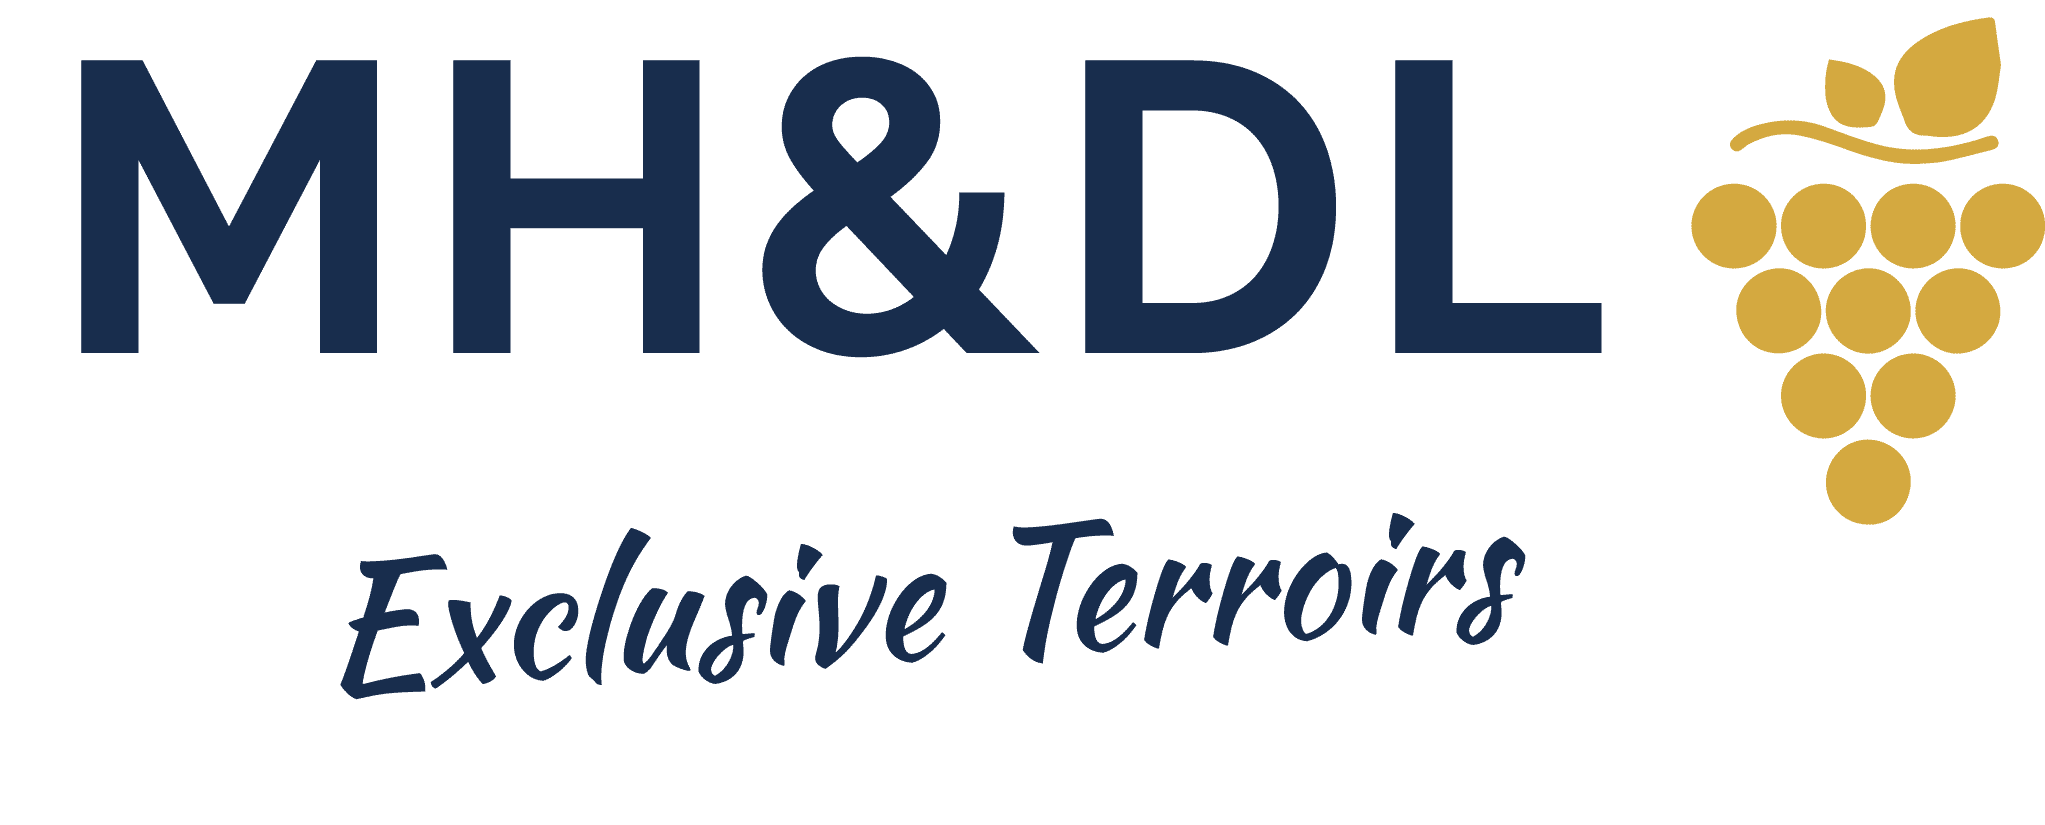 MH&DL Exclusive Terroirs - High quality wine importer